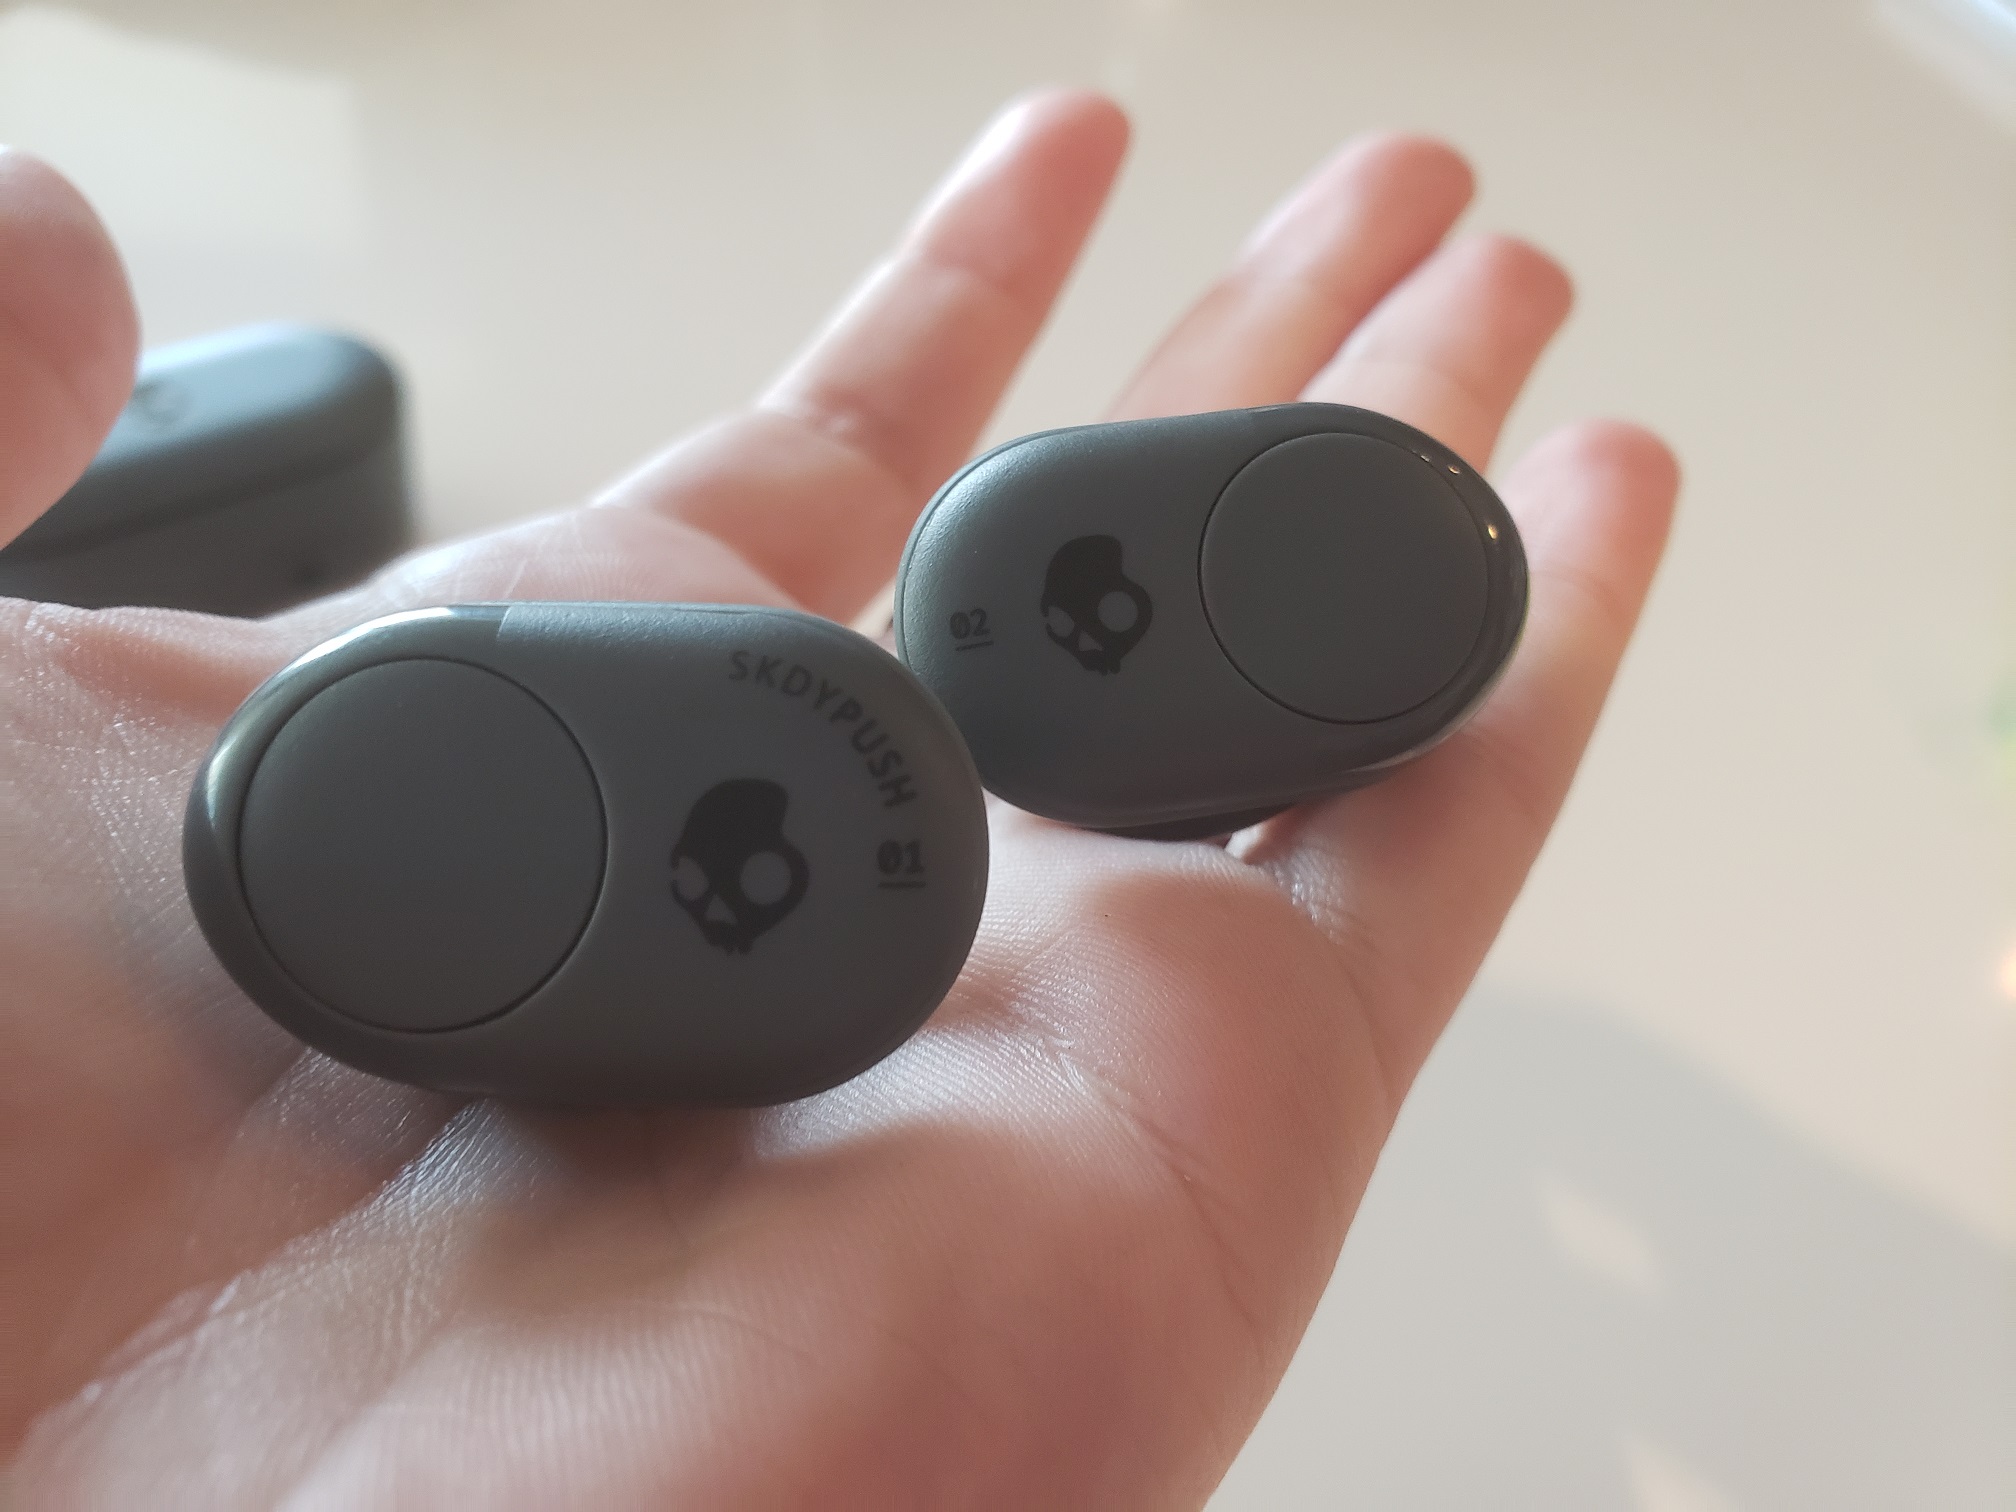 image of a hand holding Skullcandy Push earbuds